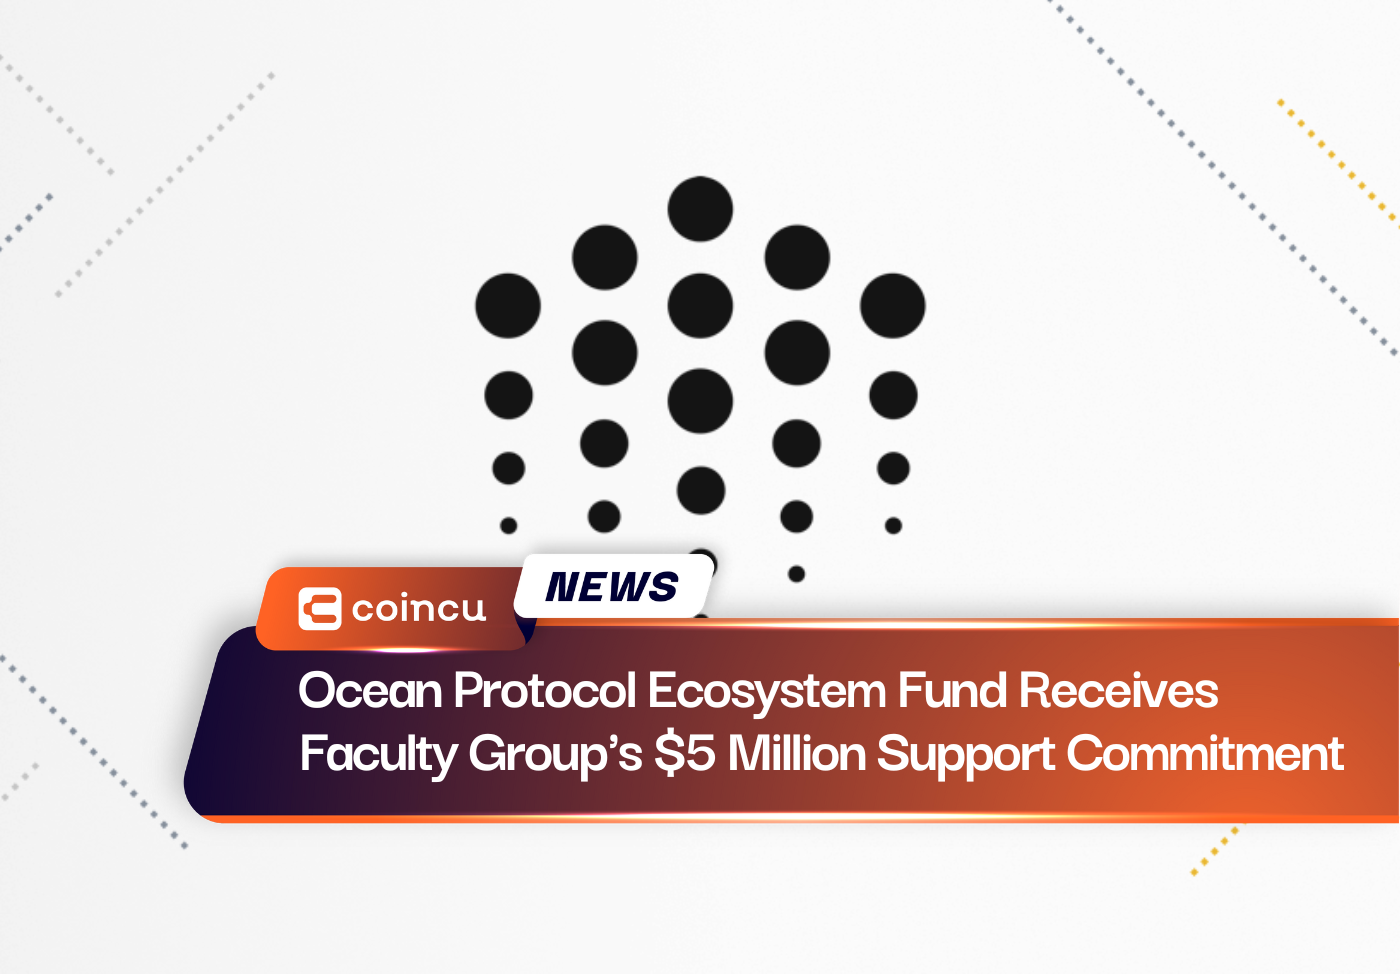 Ocean Protocol Ecosystem Fund Receives Faculty Group's $5 Million Support Commitment